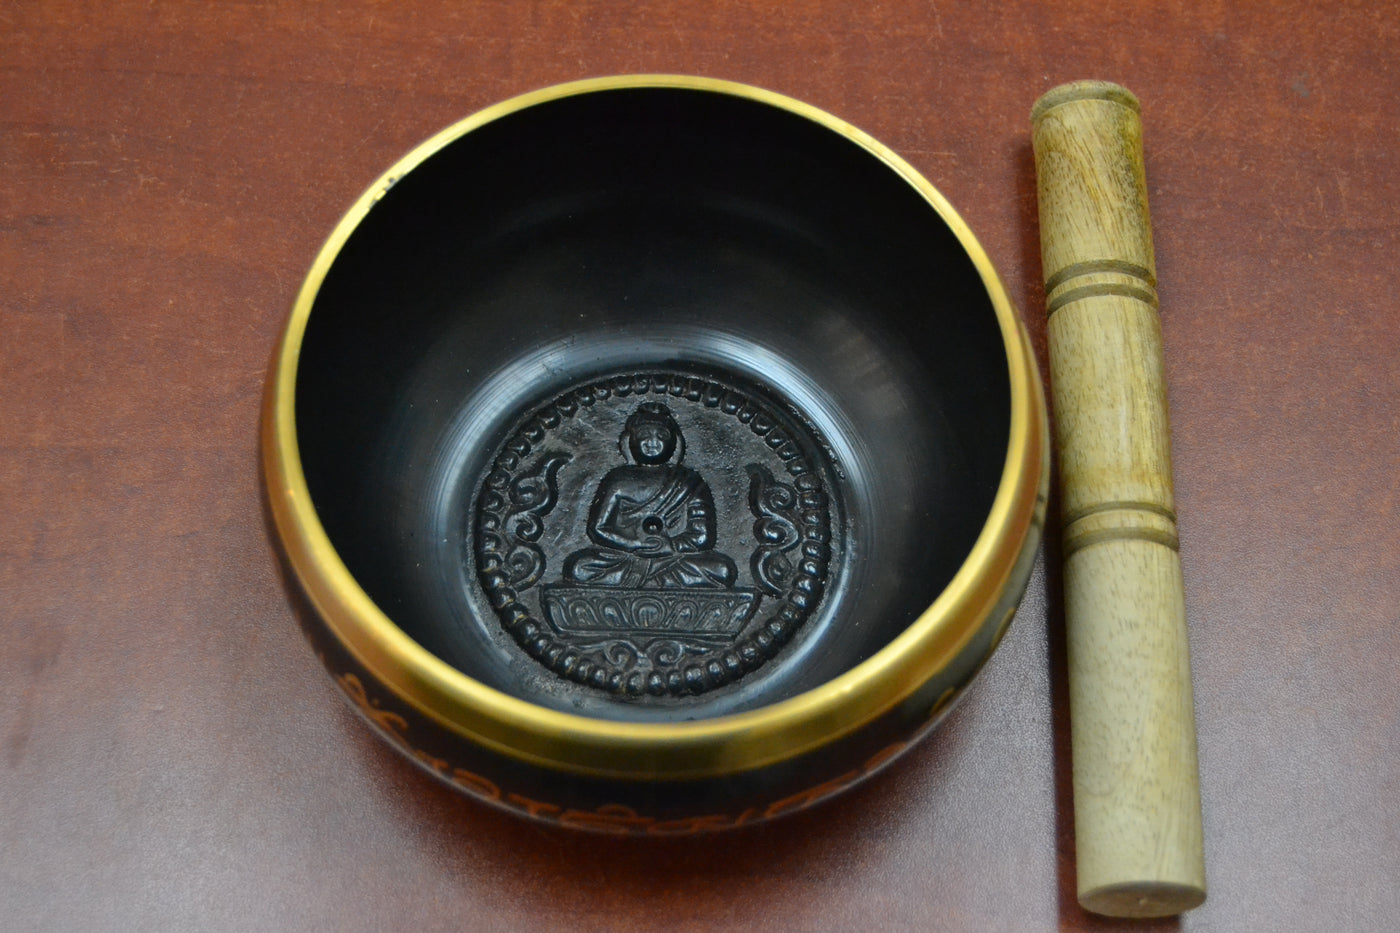 Handmade Nepal Tibetan Buddhist Brass Singing Bowl - Roses & Chains | Fashionable Clothing, Shoes, Accessories, & More